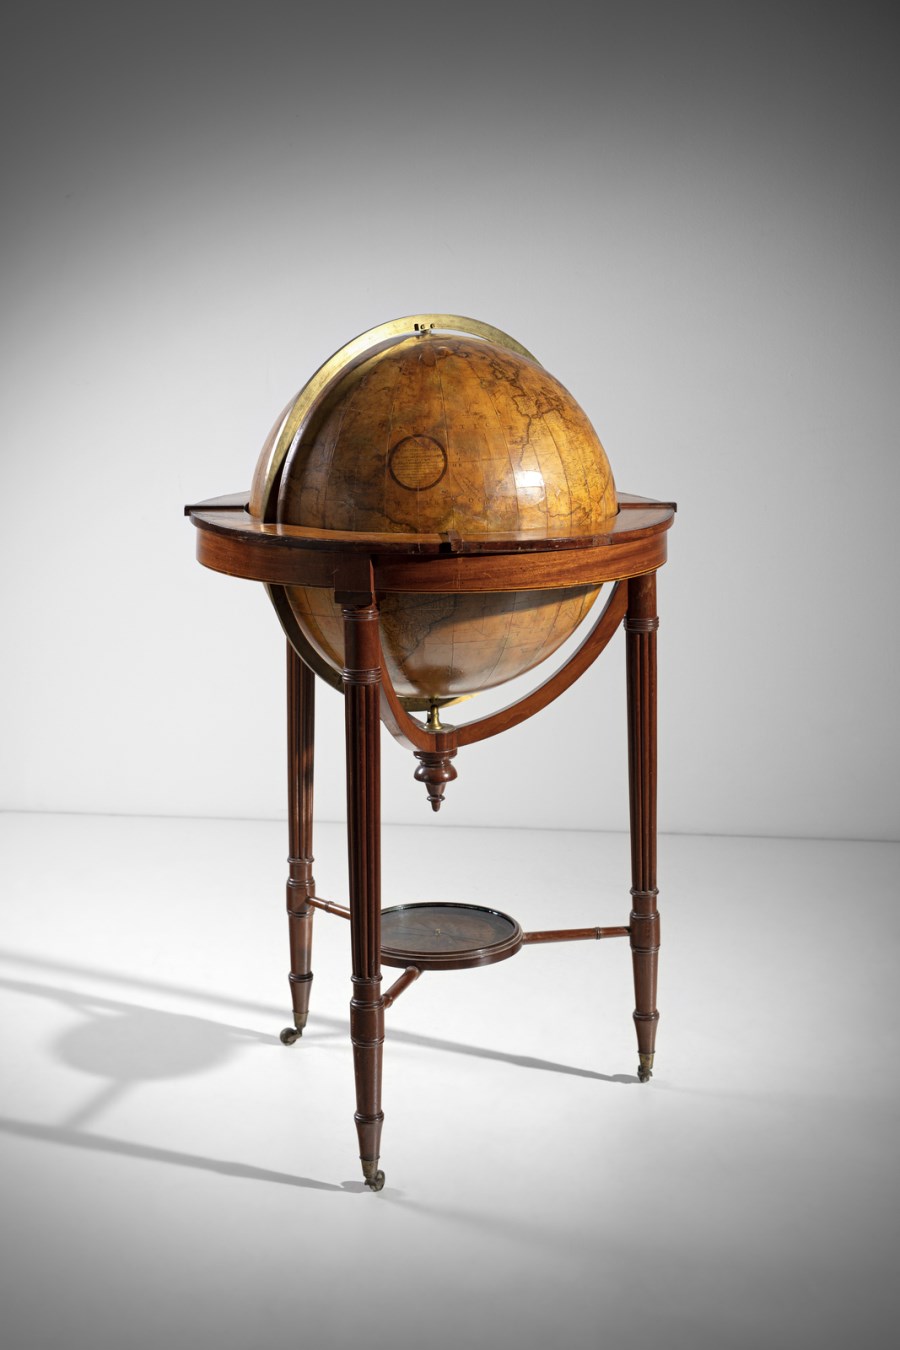 A Regency terrestrial globe raised on a mahogany stand on three circular reeded legs united by stretchers supporting a compass and terminating in brass castors ( John & William Cary, Londra, 1806)